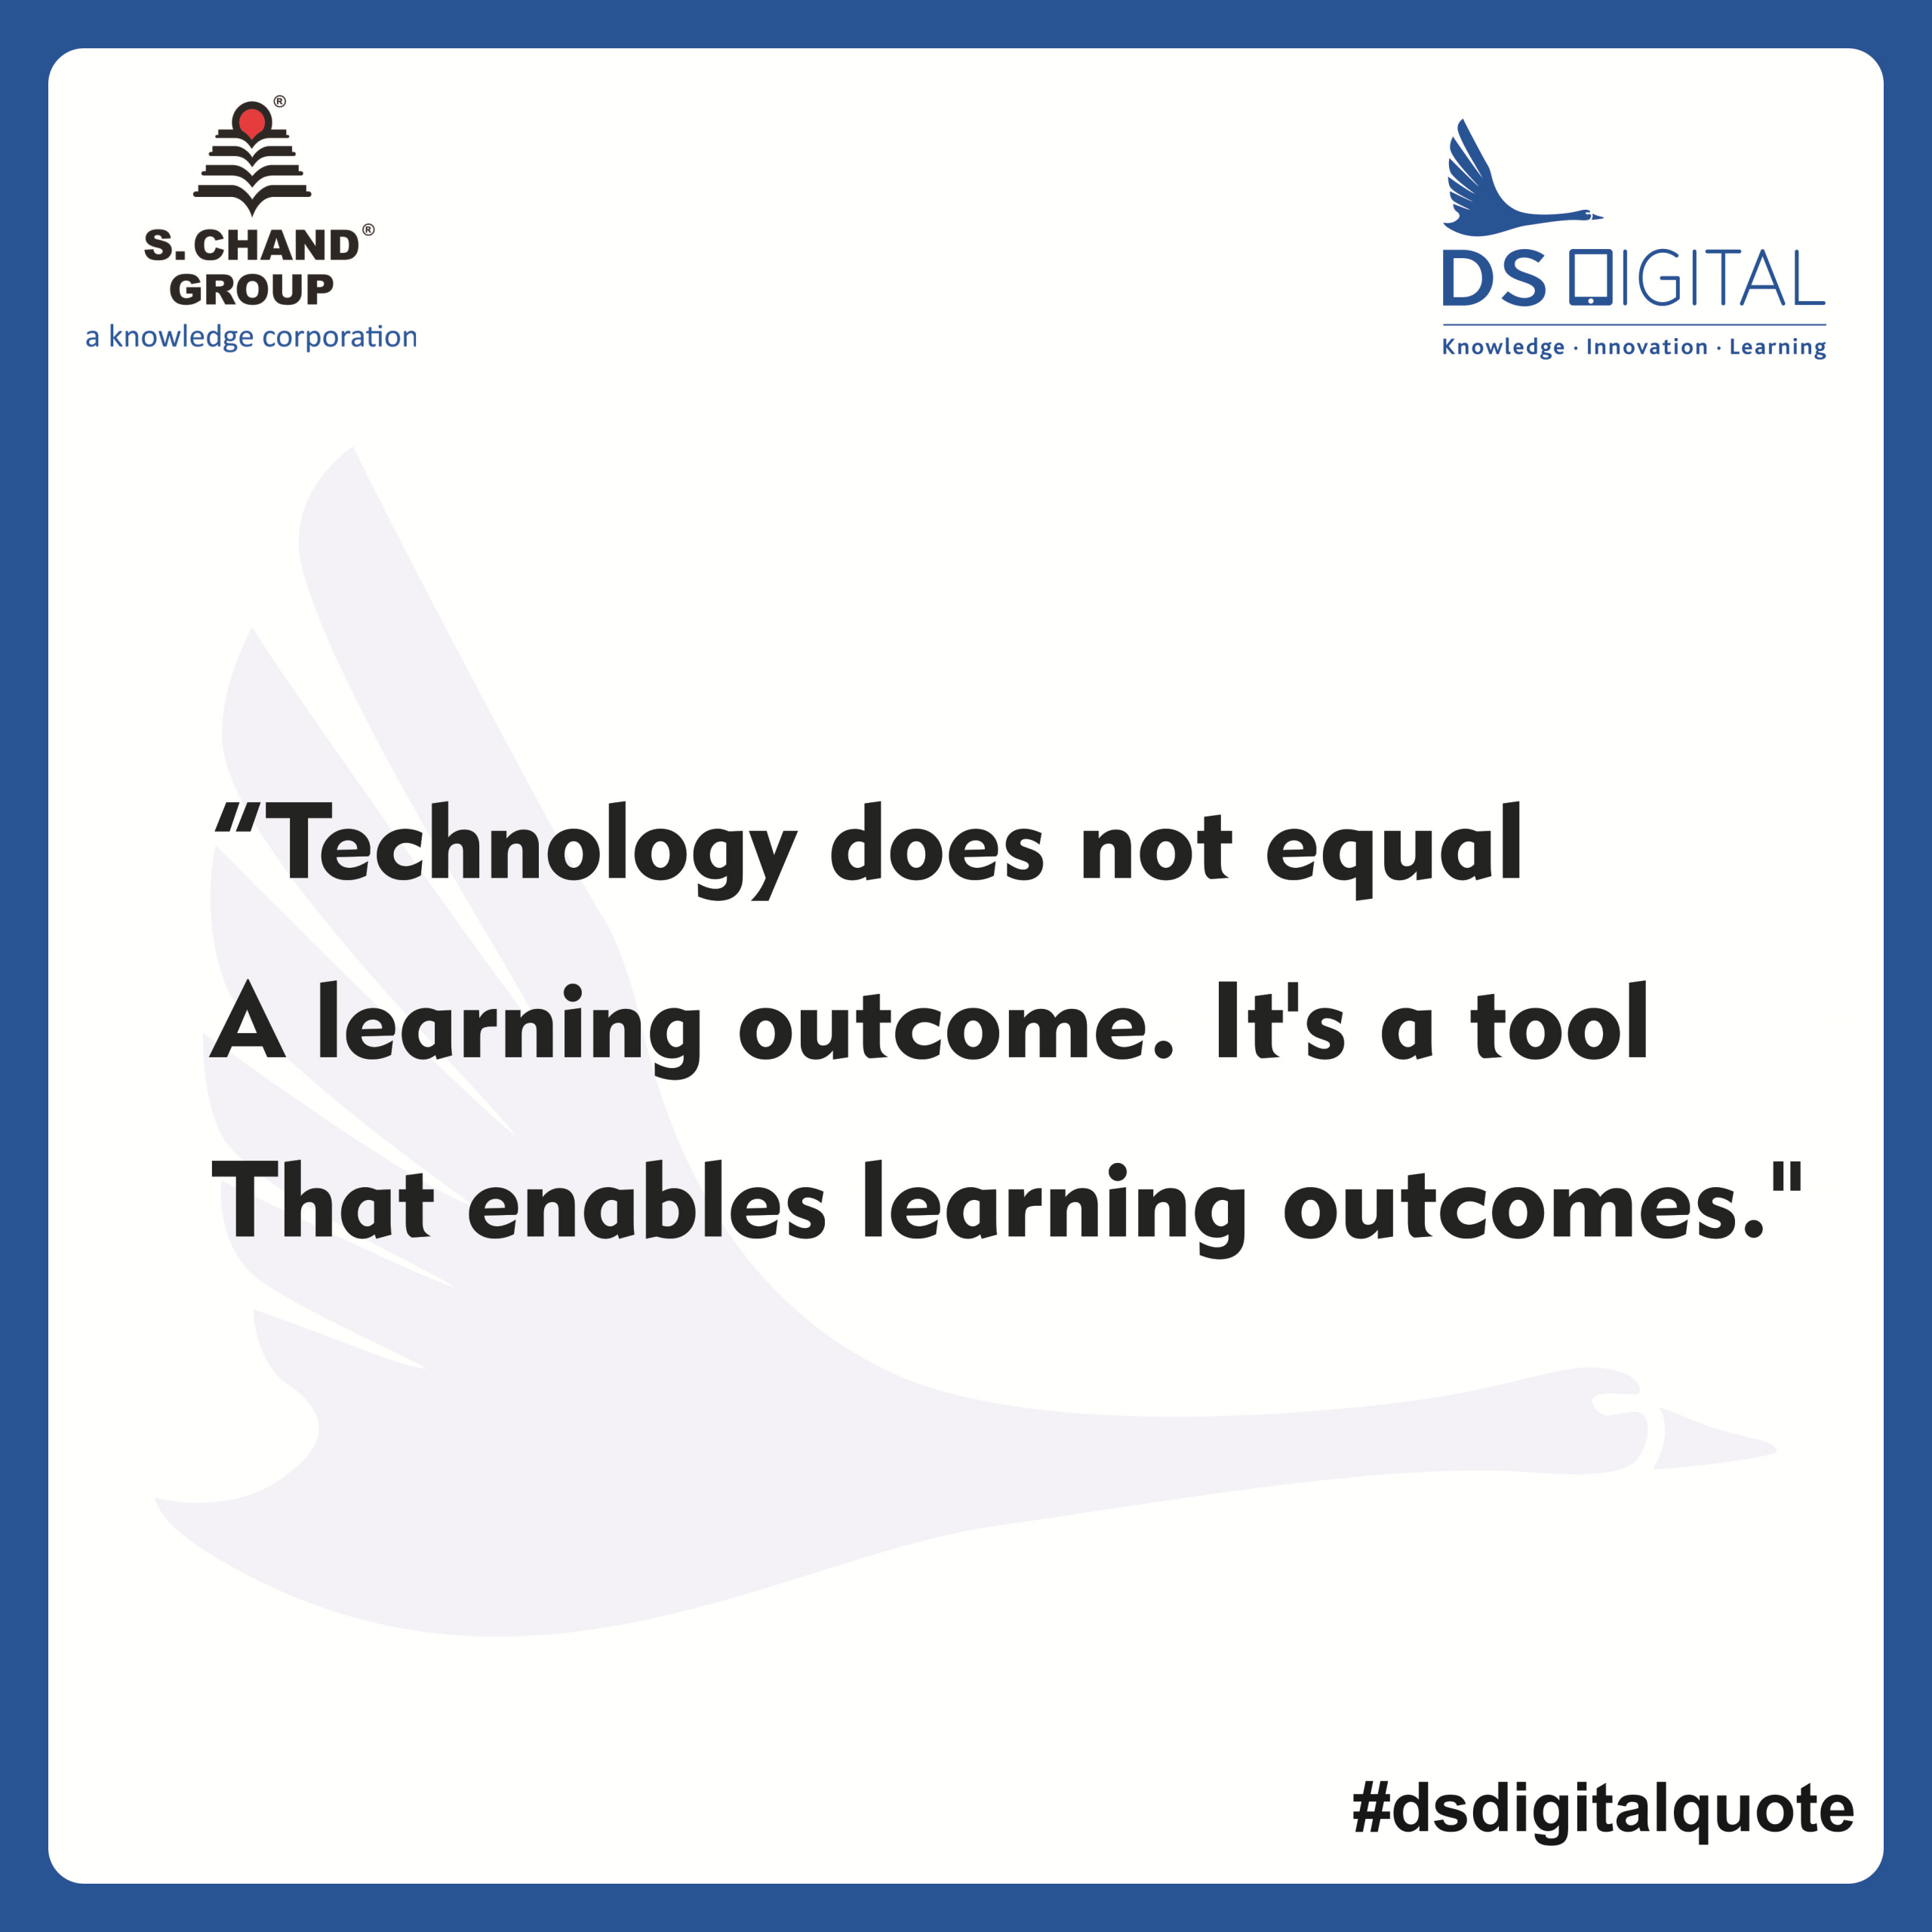 Technology And Education Quotes
 digital education quotes 12 DS Digital